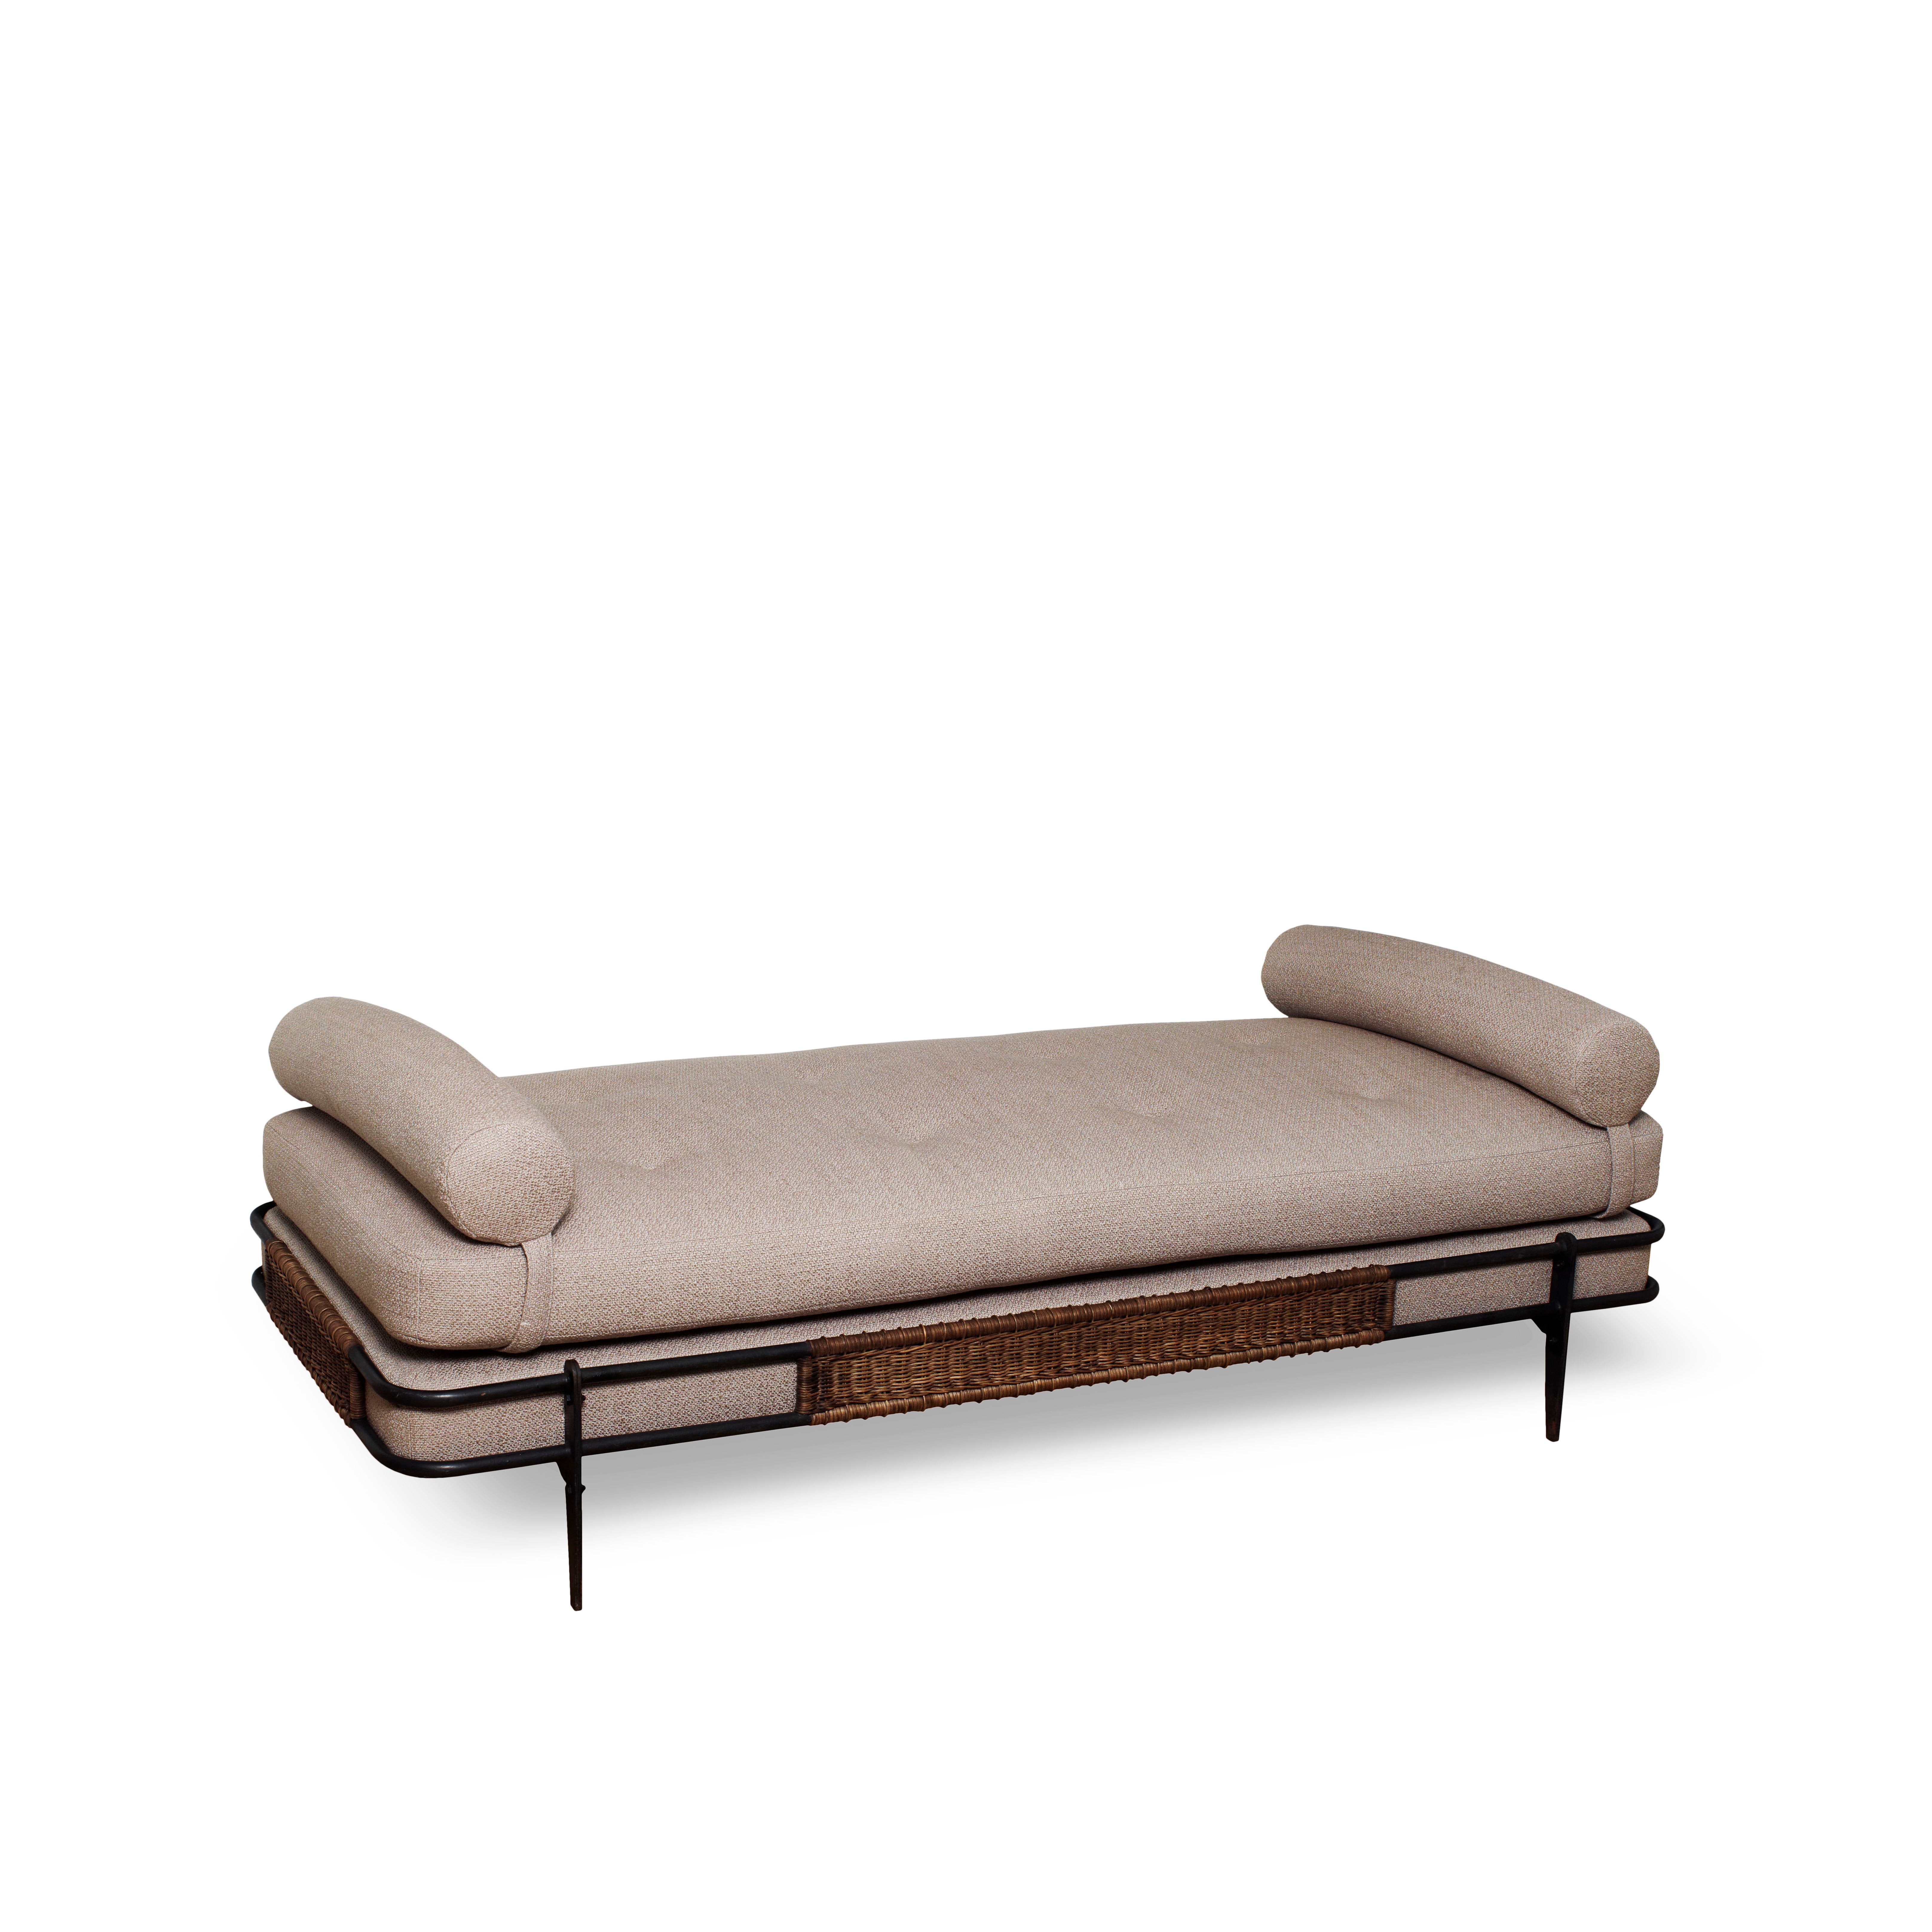 Daybed In Lacquered Metal With Wicker Panels By Mathieu Mategot